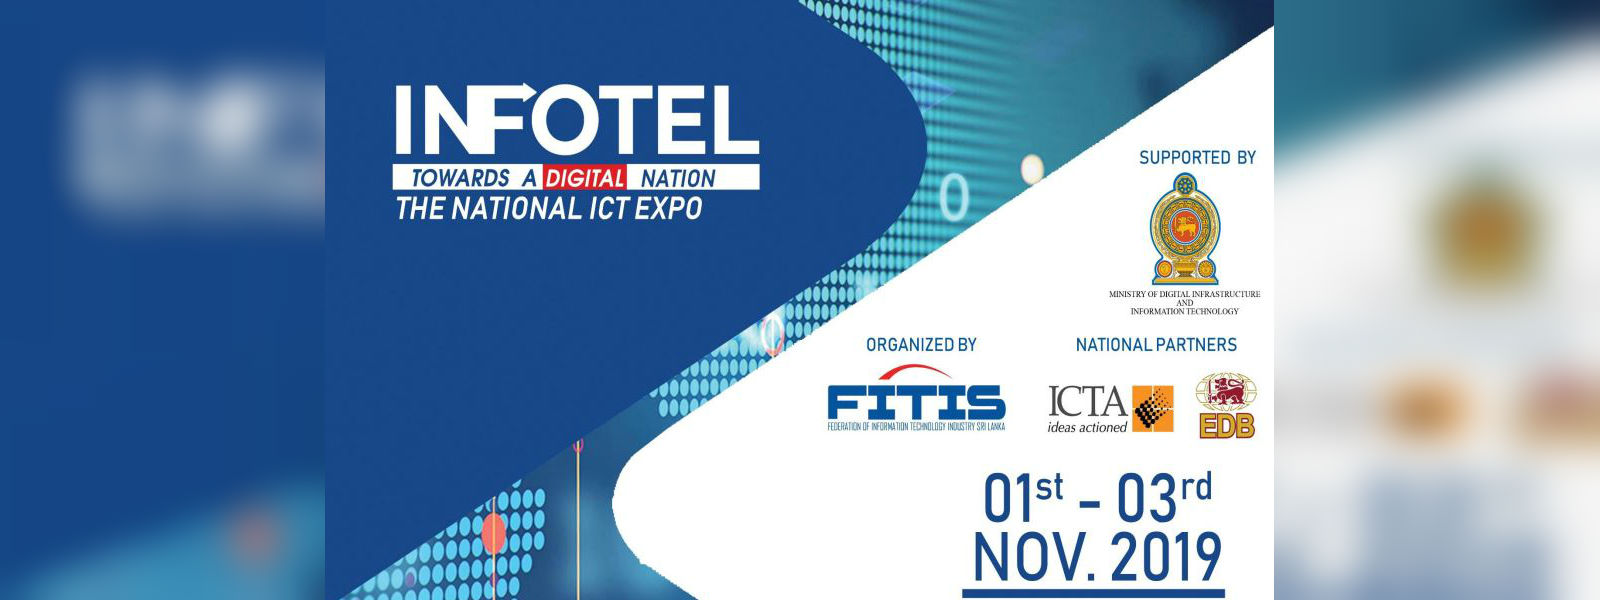 The Official Launch of ‘INFOTEL 2019’ by FITIS